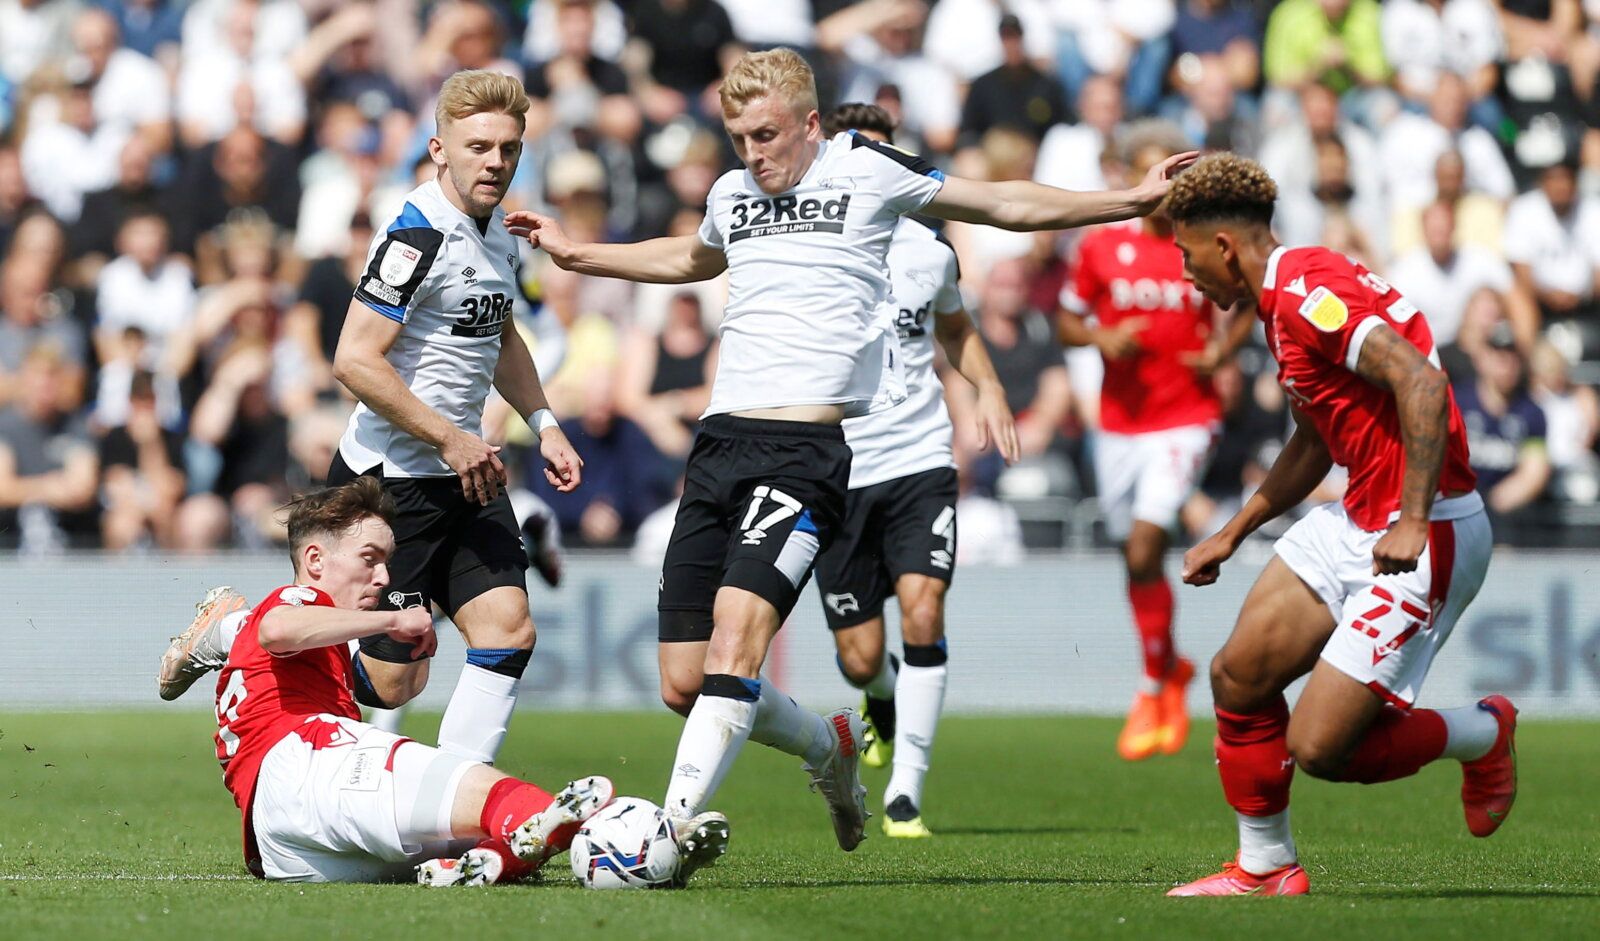 Soccer Football - Championship - Derby County v Nottingham Forest - Pride Park, Derby, Britain - August 28, 2021  Nottingham Forest's James Garner in action with Derby County's Louie Sibley   Action Images/Craig Brough